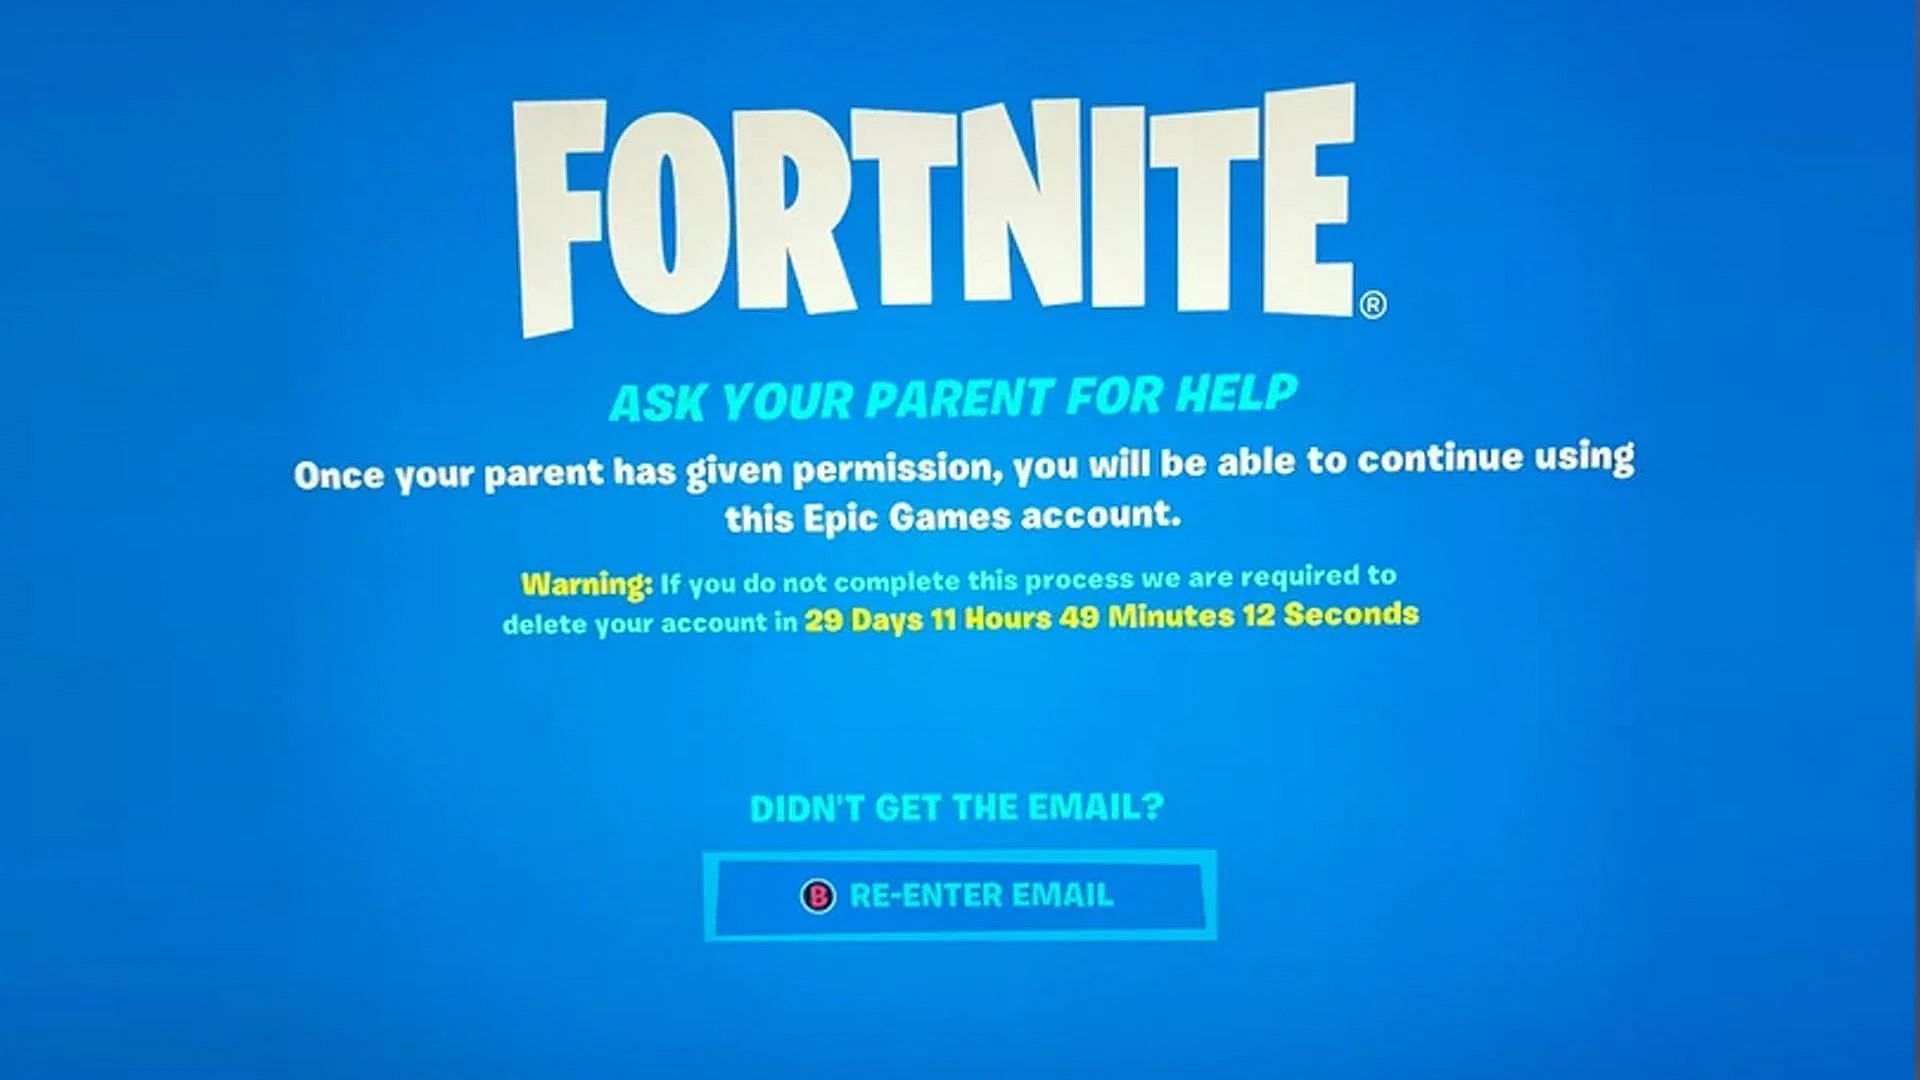 Epic Games is deleting Fortnite accounts (Image via Epic Games)